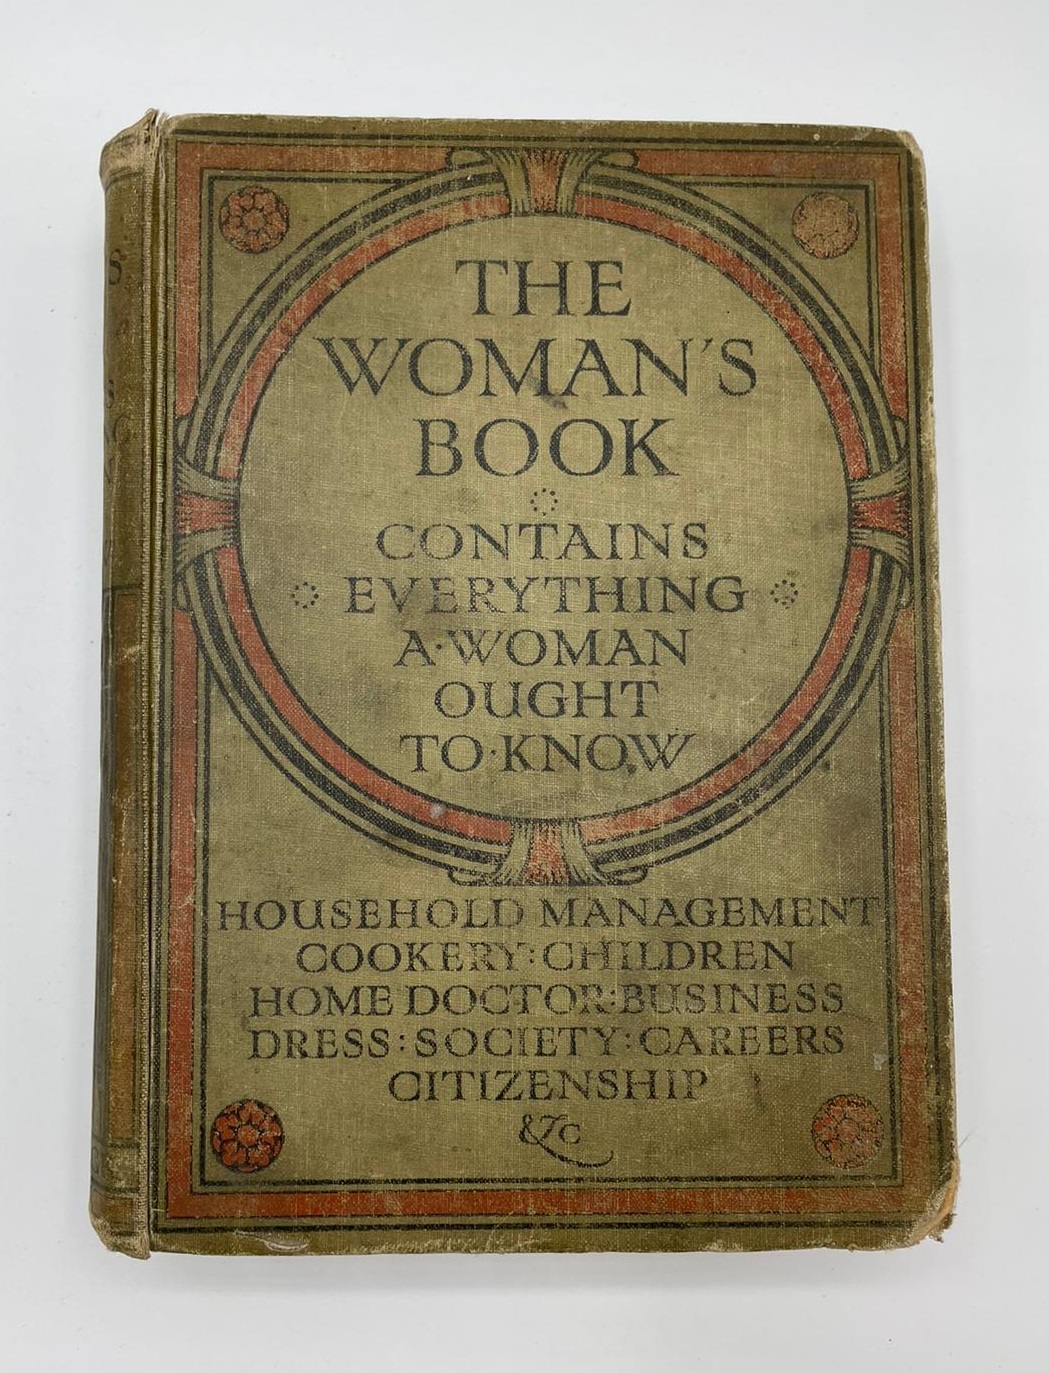 The Woman's Book. ''Contains everything a woman ought to know.'' This book contains information on household management, cookery, motherhood and careers.